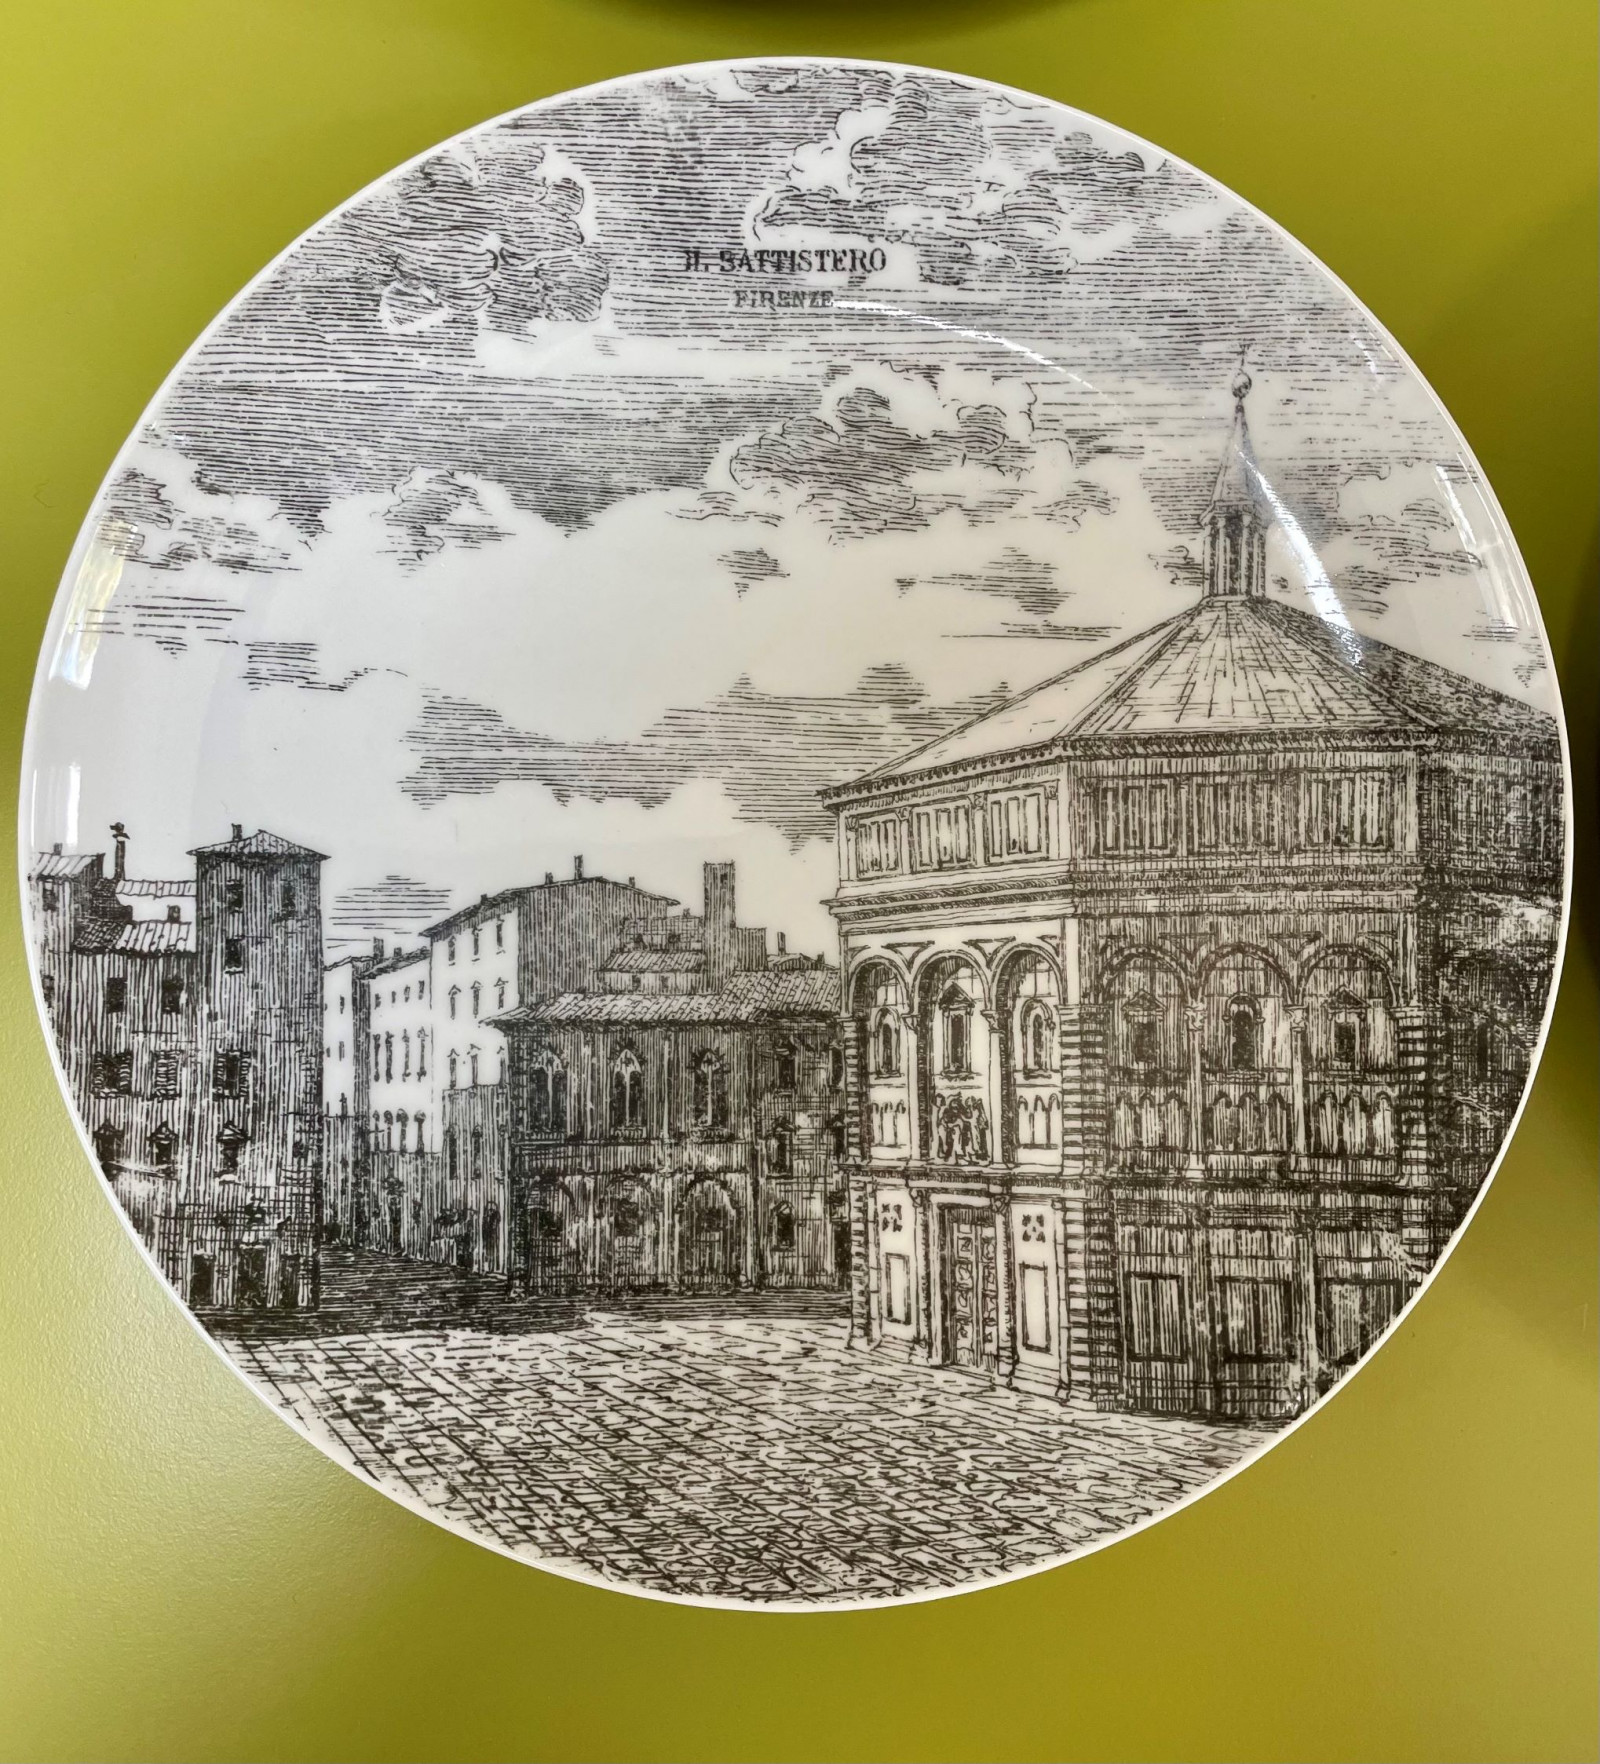 The " Serie Firenze" 1960s Plates by Fornasetti